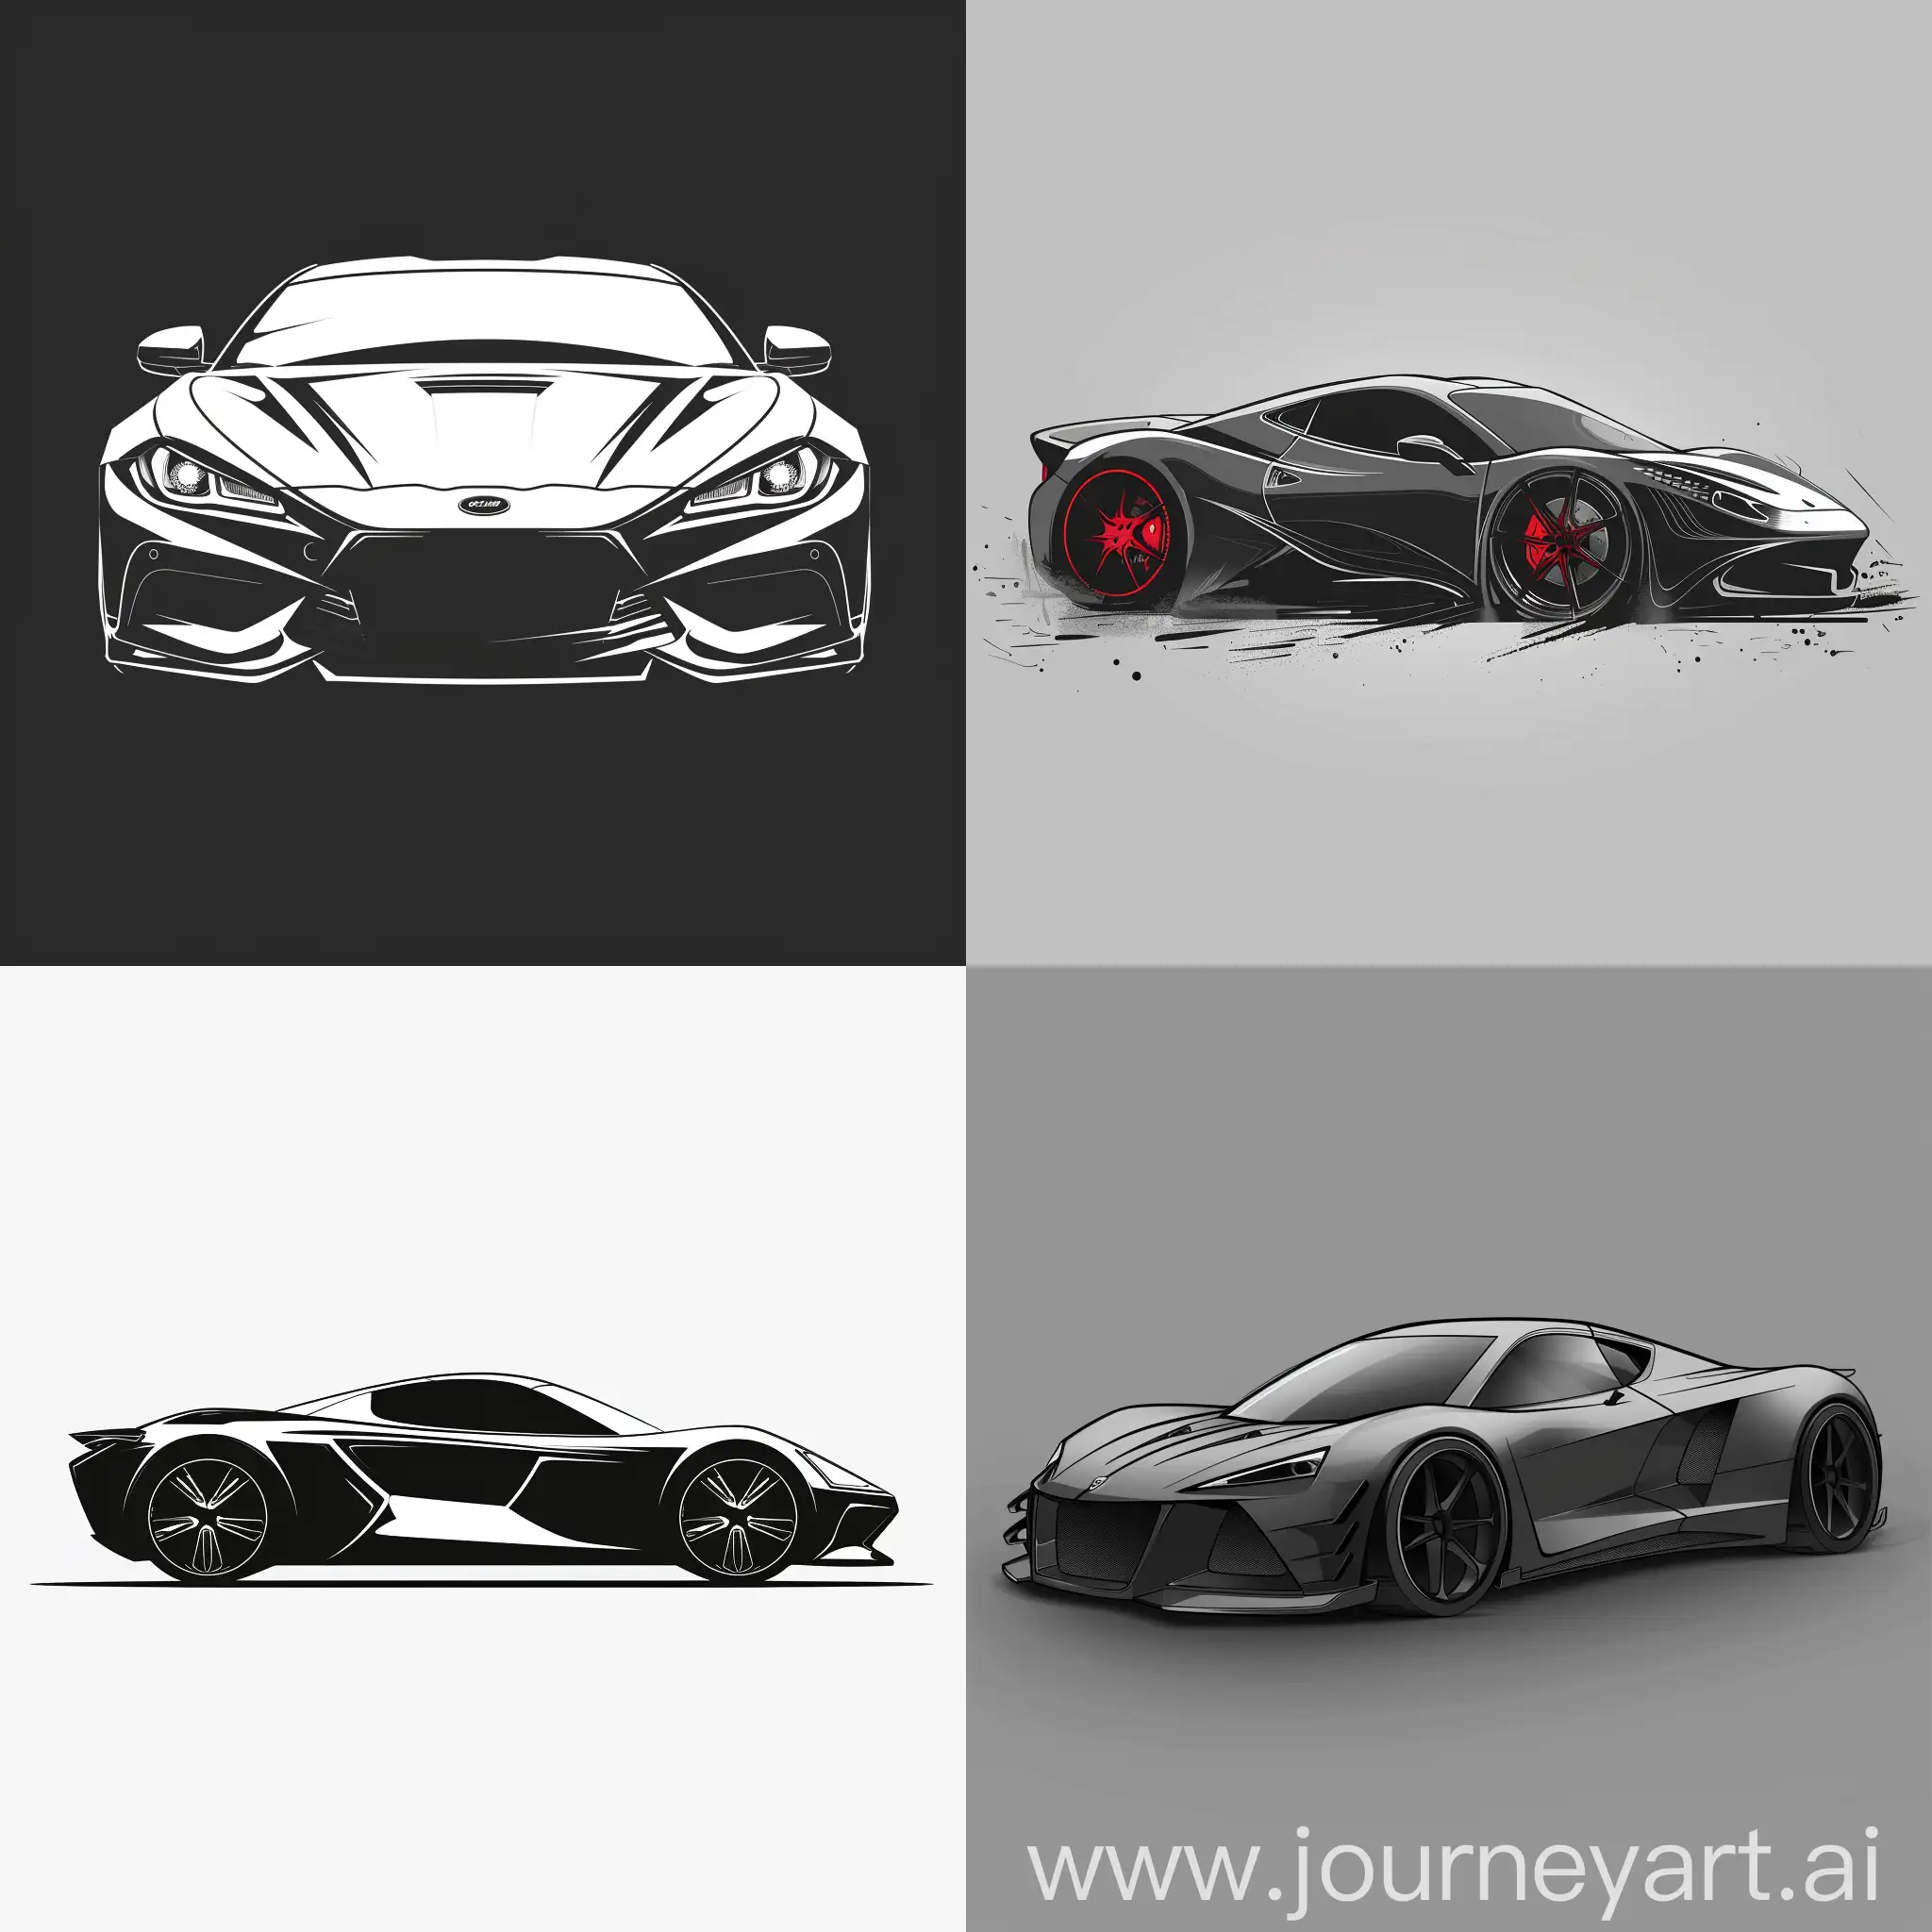 create a car no fill and bodywork logo, no colors , minimalist, no much details